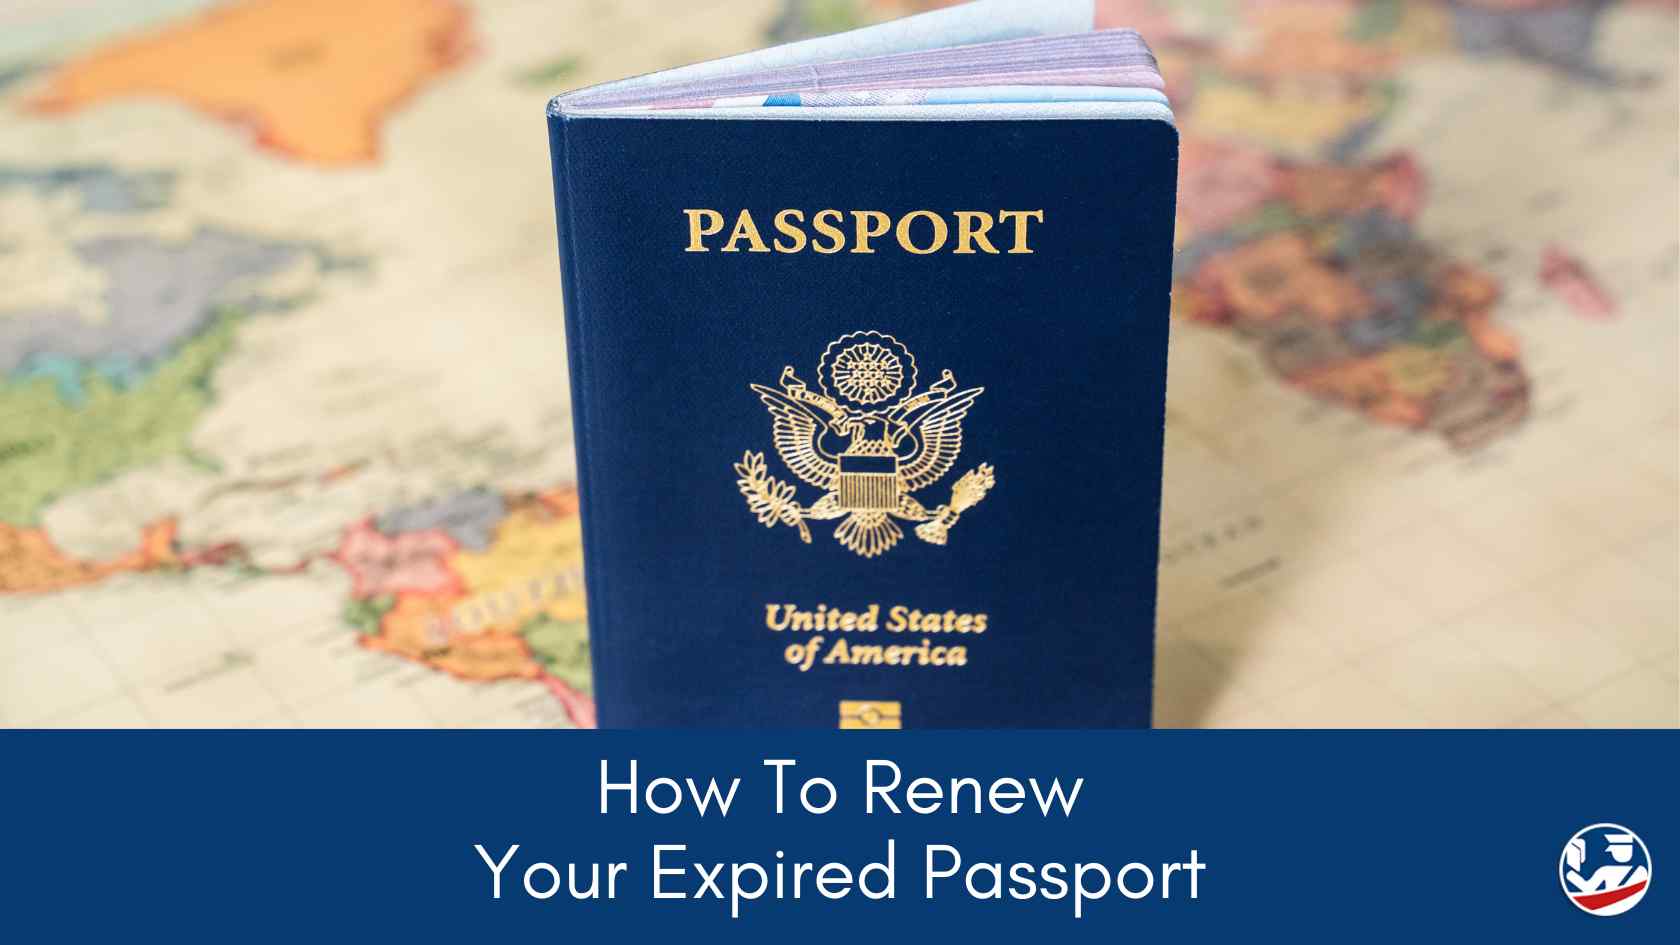 Replacing an expired passport that has been well used